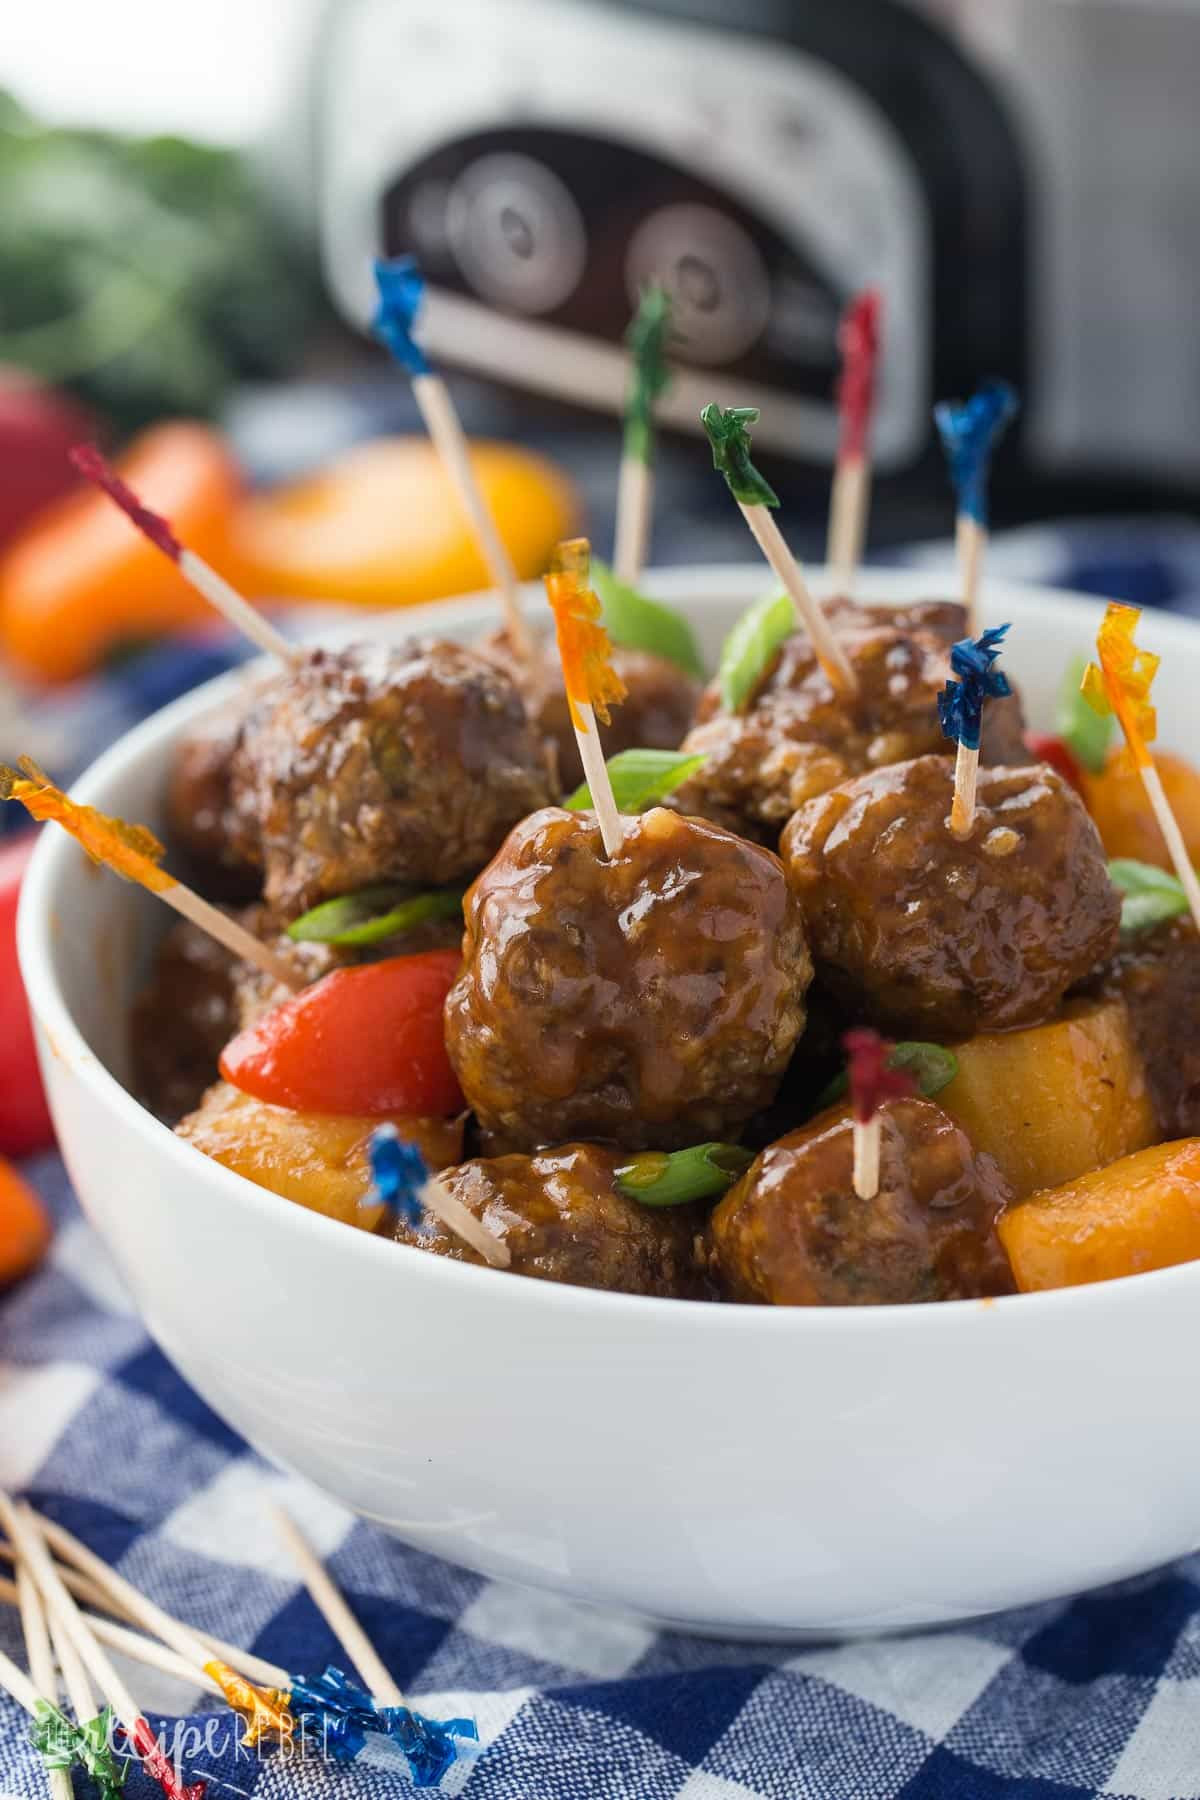 14 Easy Slow Cooker Appetizers
 Slow Cooker Pineapple Brown Sugar Meatballs easy appetizer